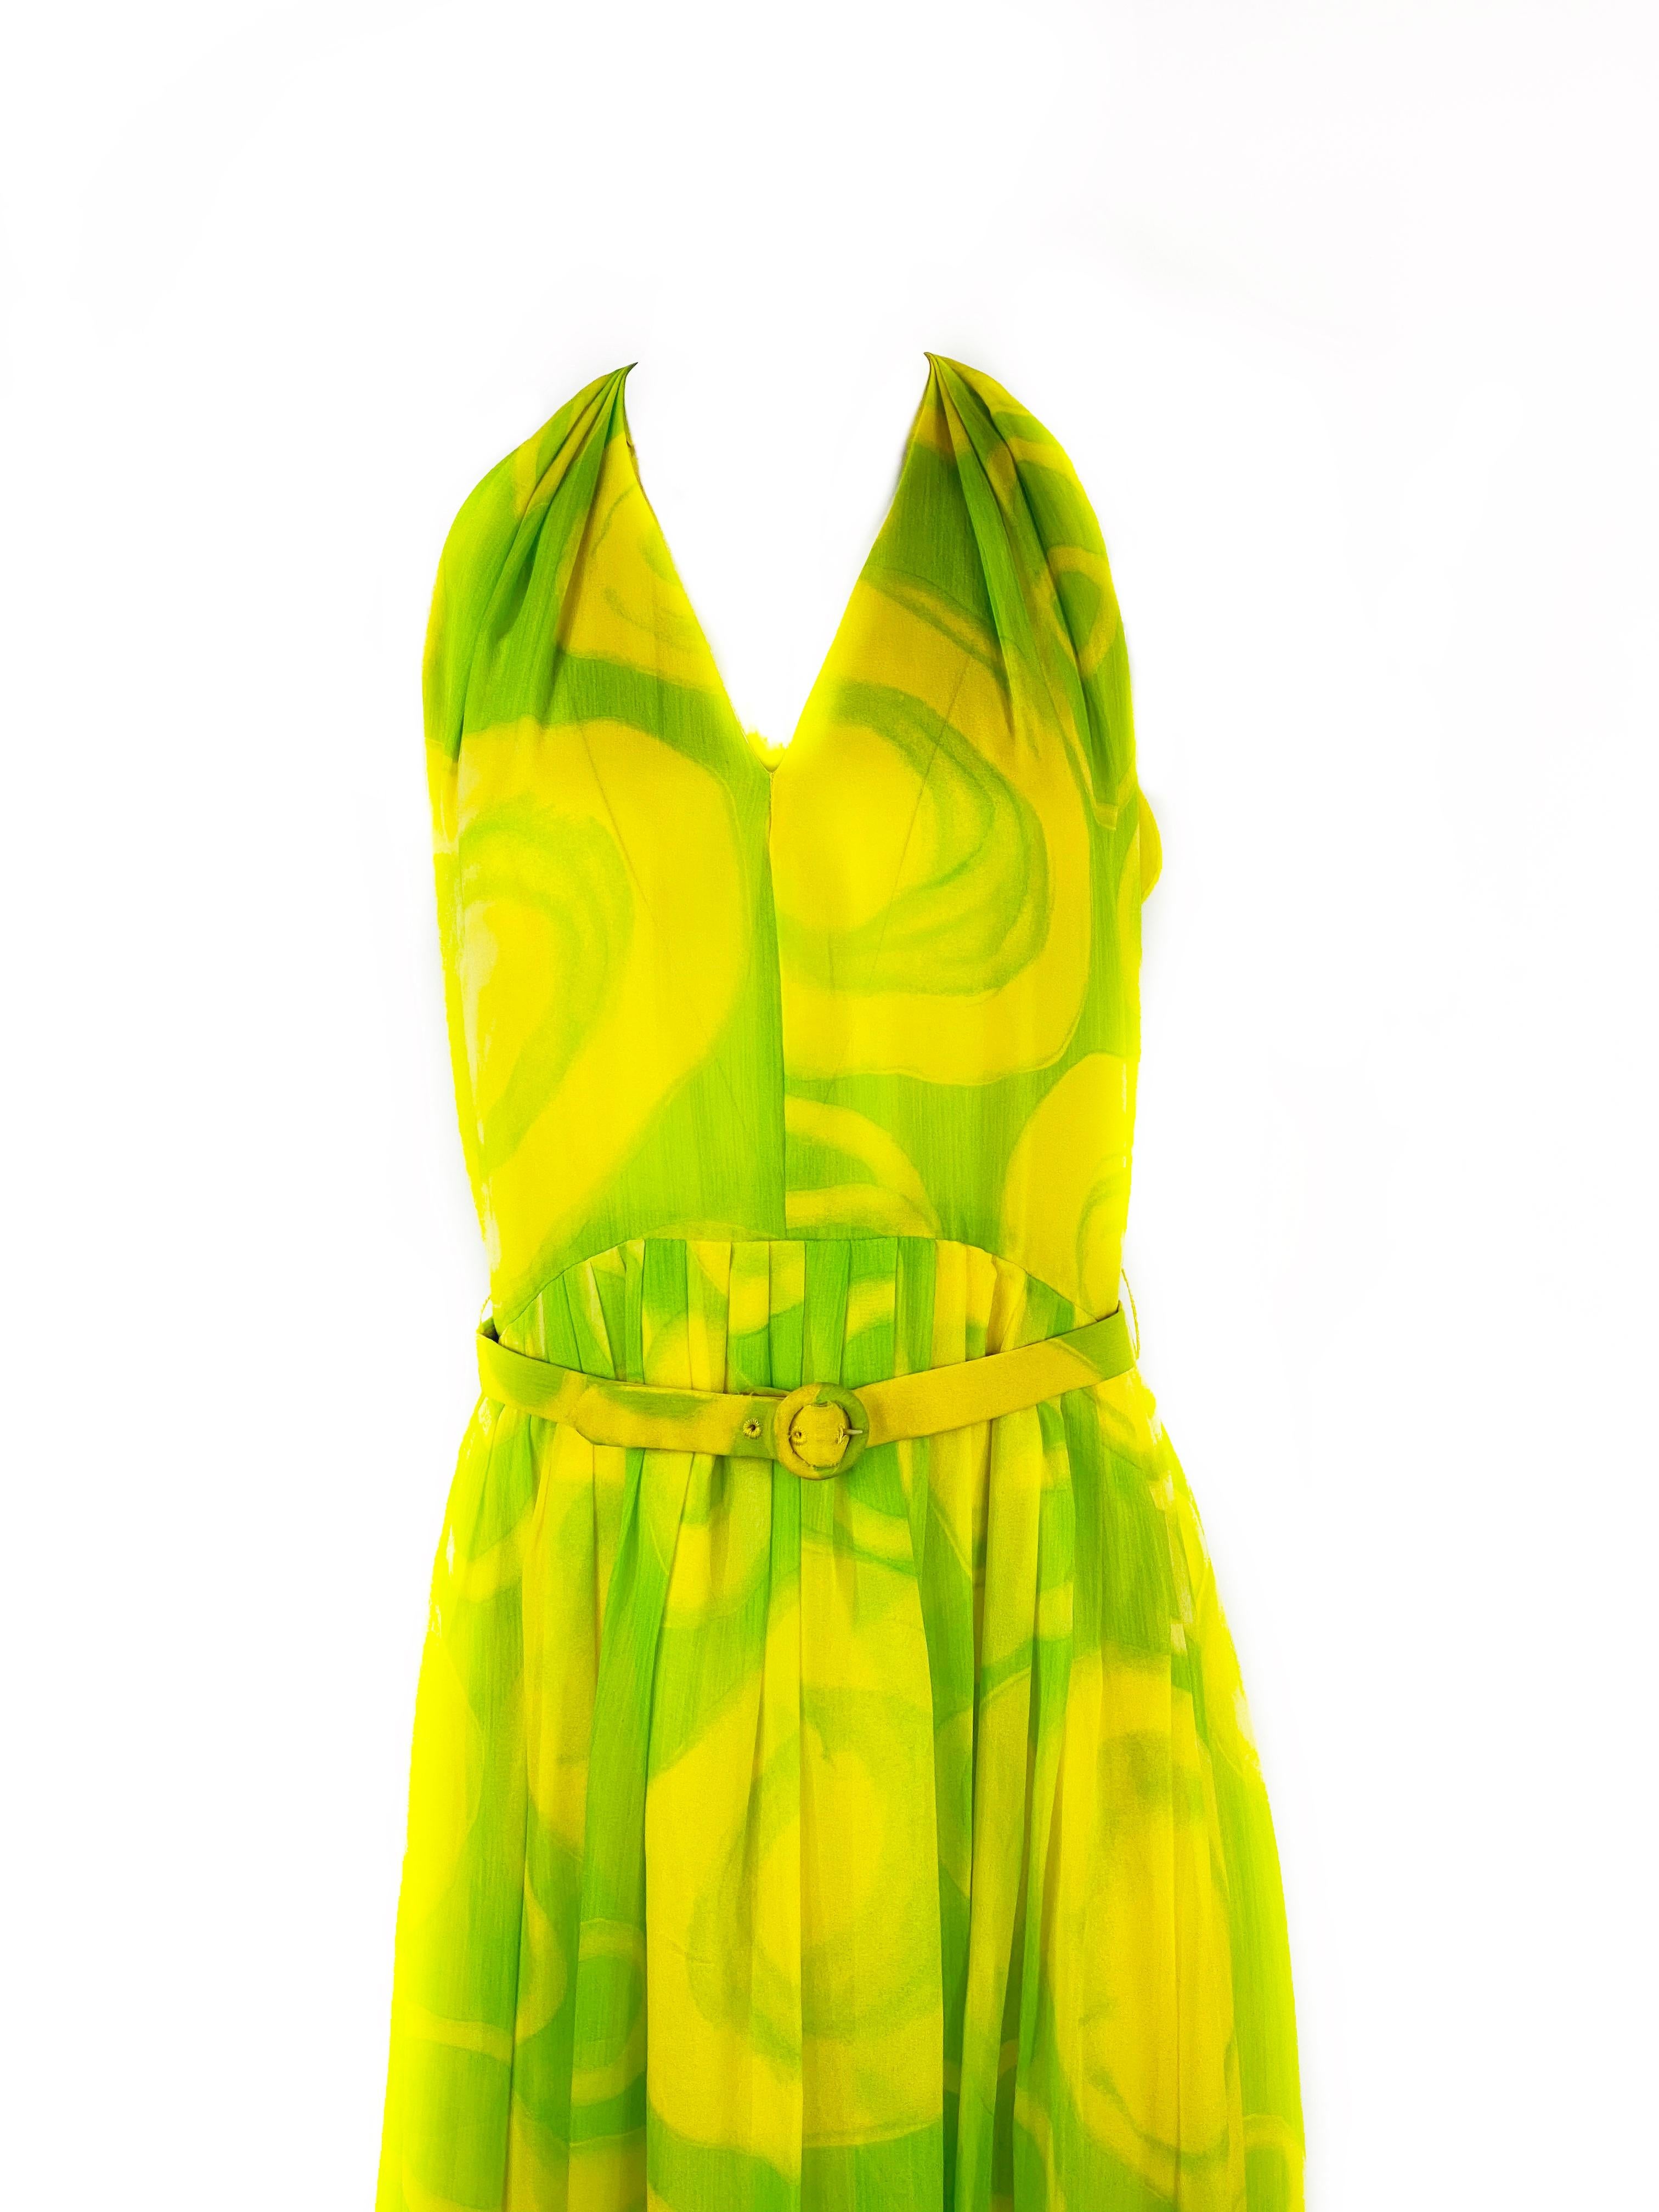 Product details:
Yellow and green geometric, abstract, circle pattern
Featuring v- neck cut out, and belt details
Sleeveless 
Floor length 
Rear zip and two hooks closure
Neiman Marcus
Made in USA
